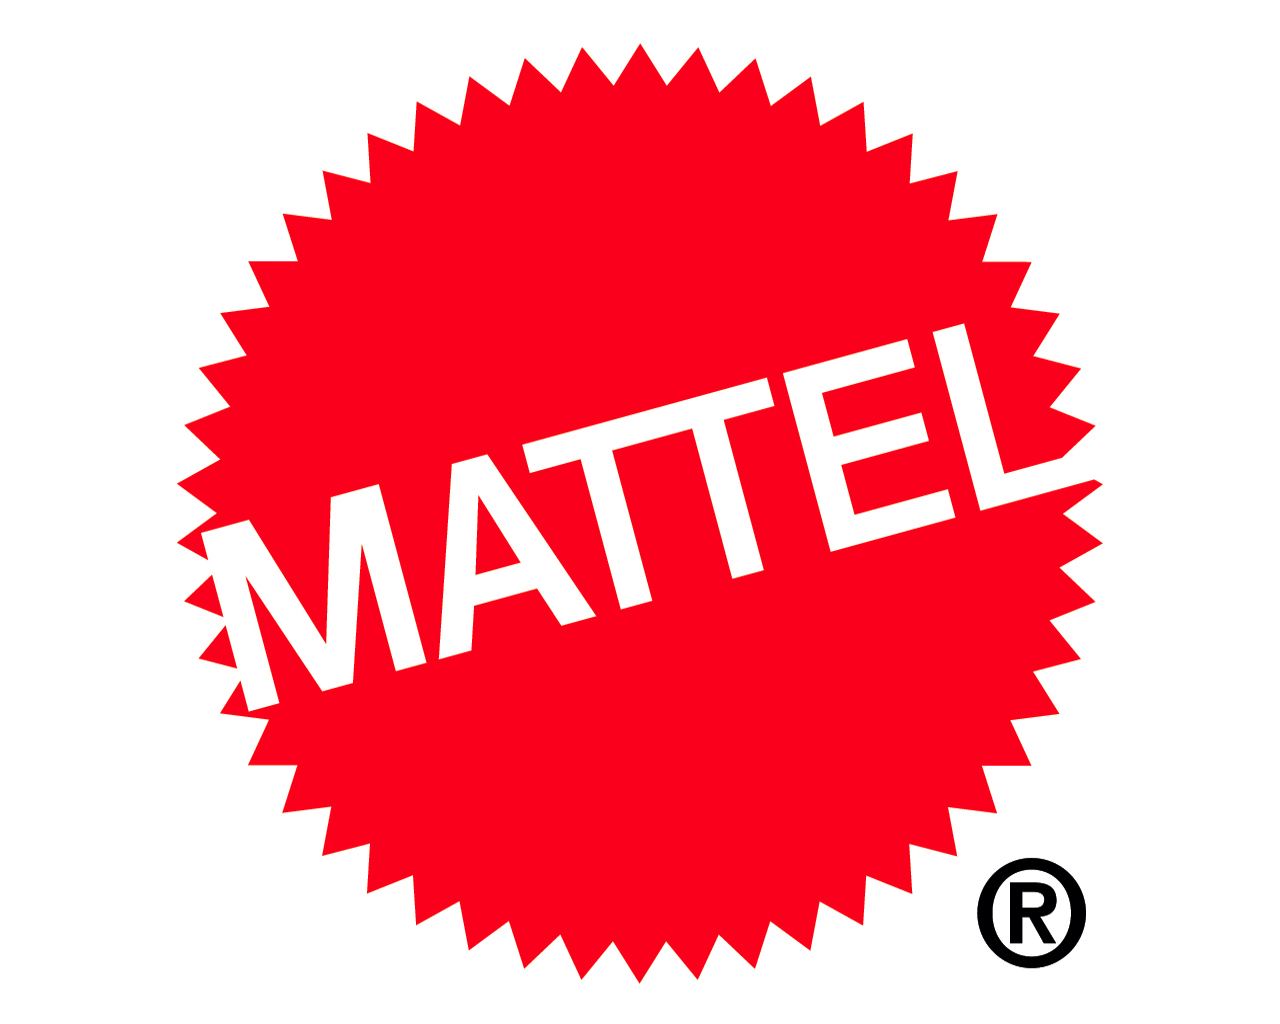 06_mattel-logo-toys-products-wallpapers-1280x1024.jpg